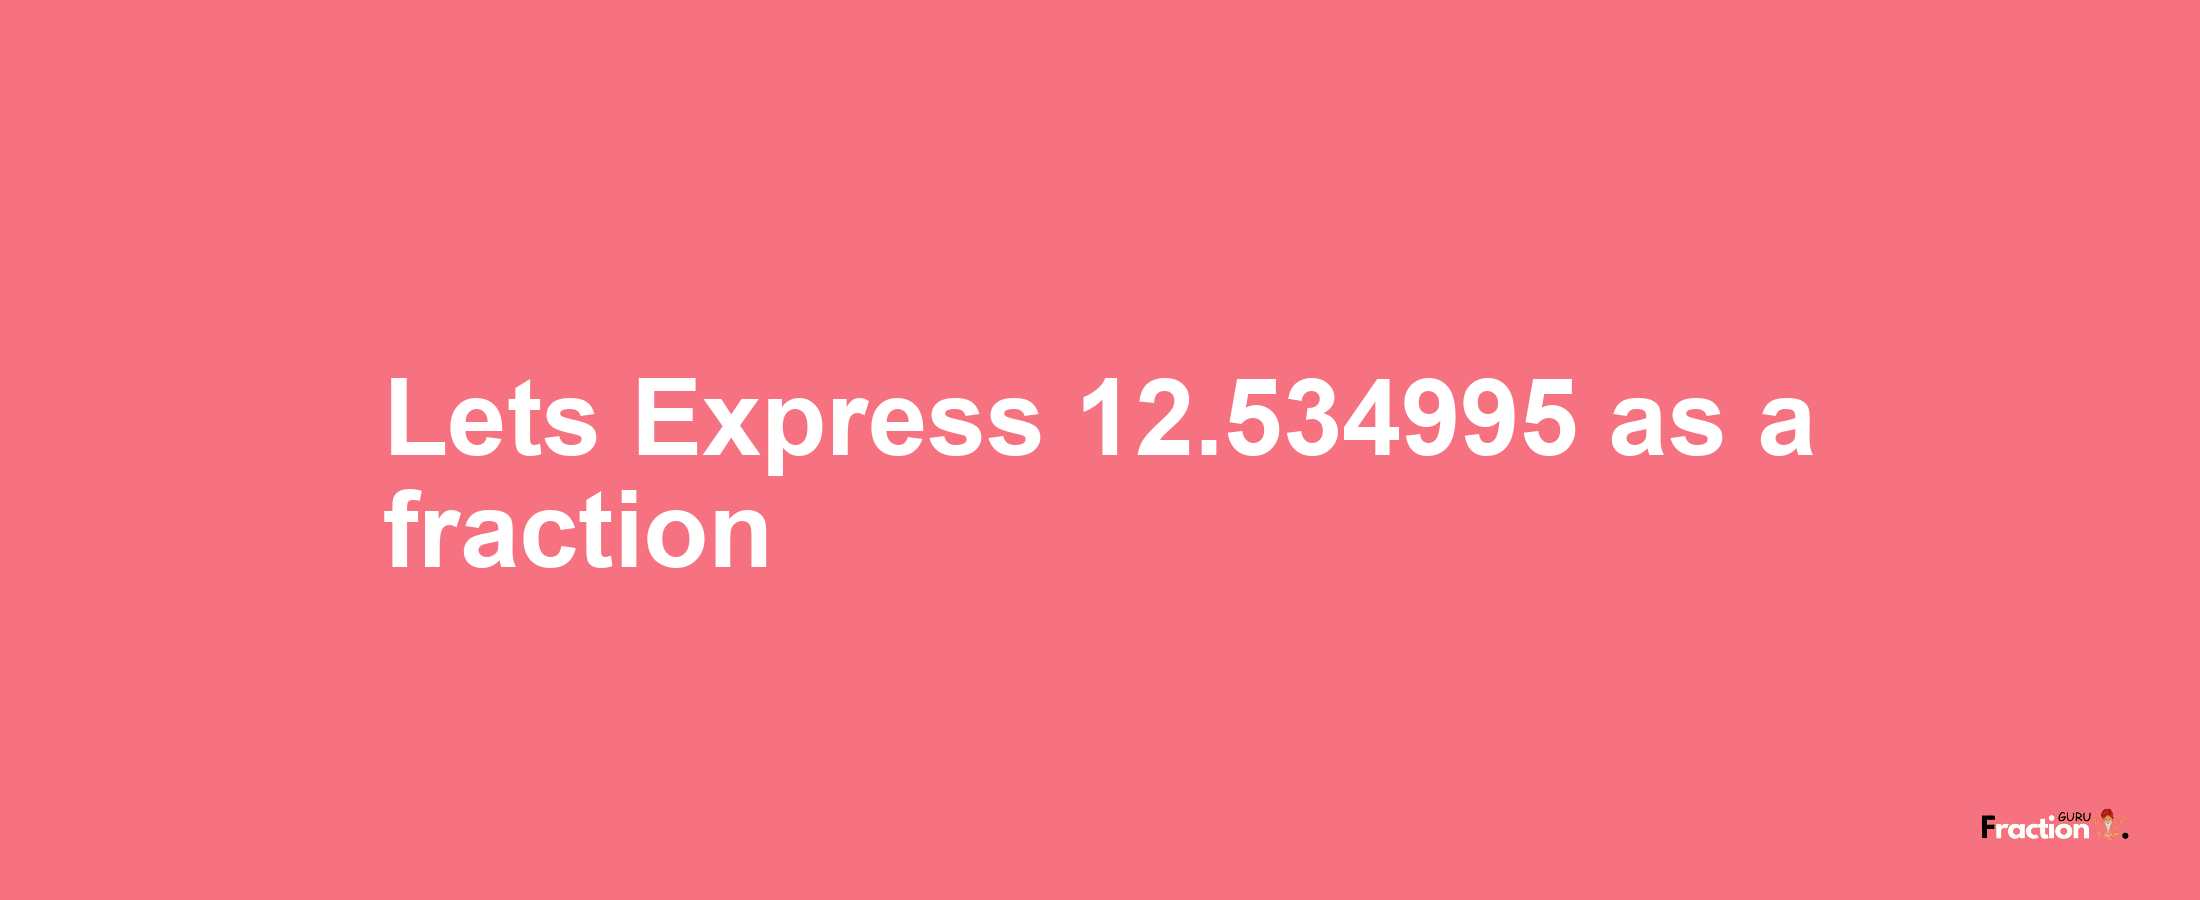 Lets Express 12.534995 as afraction